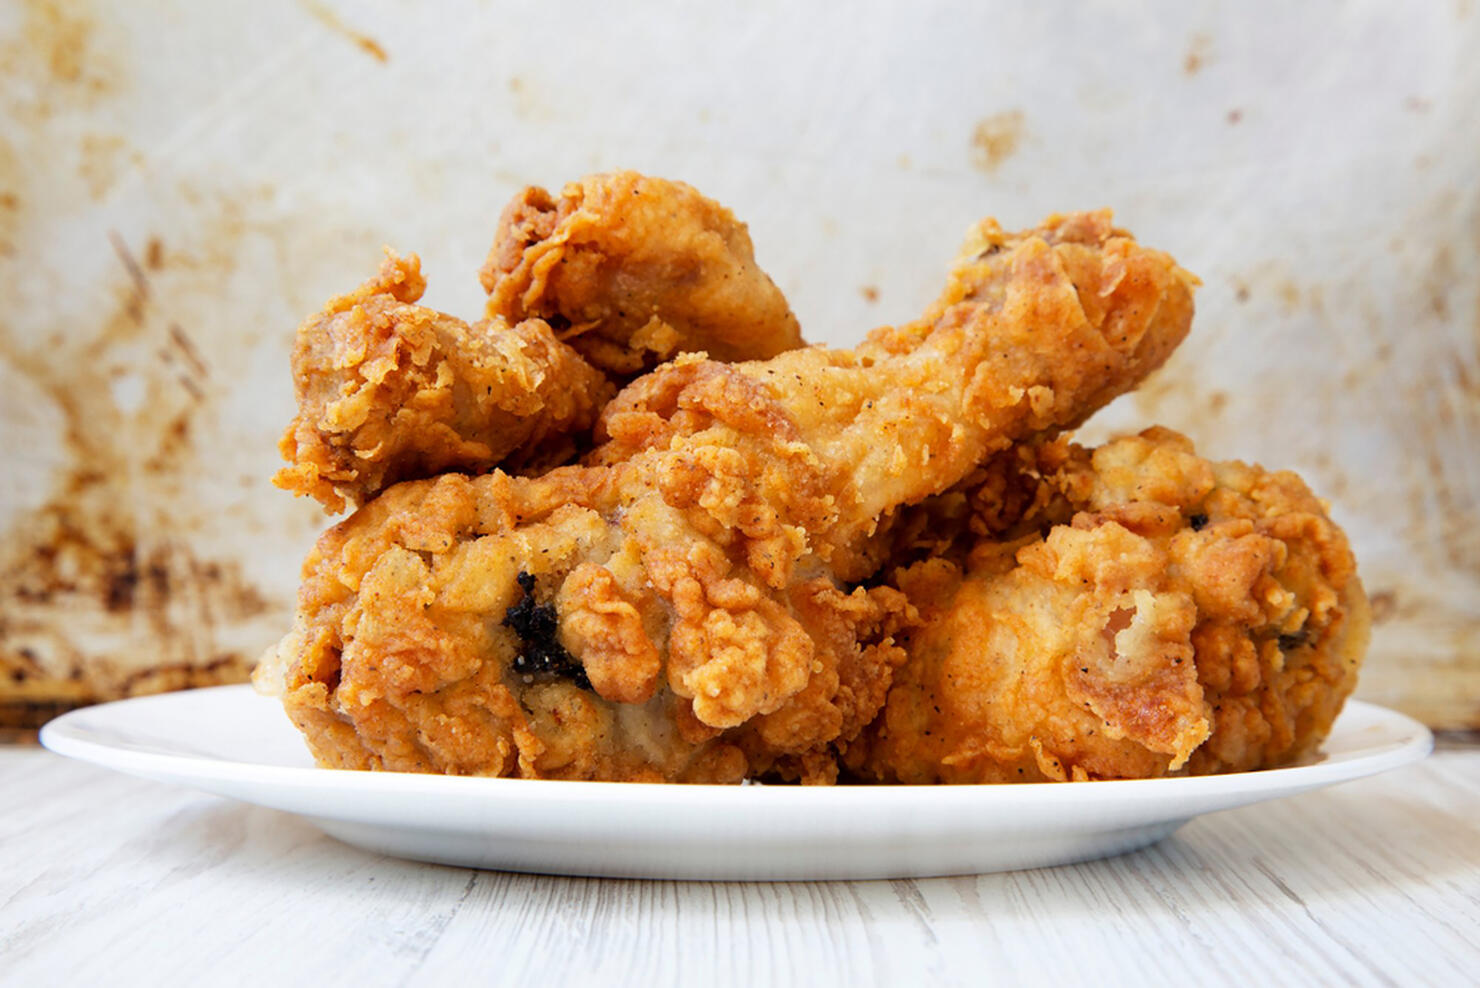 Fried chicken drumsticks on a white round plate, closeup. Side view.